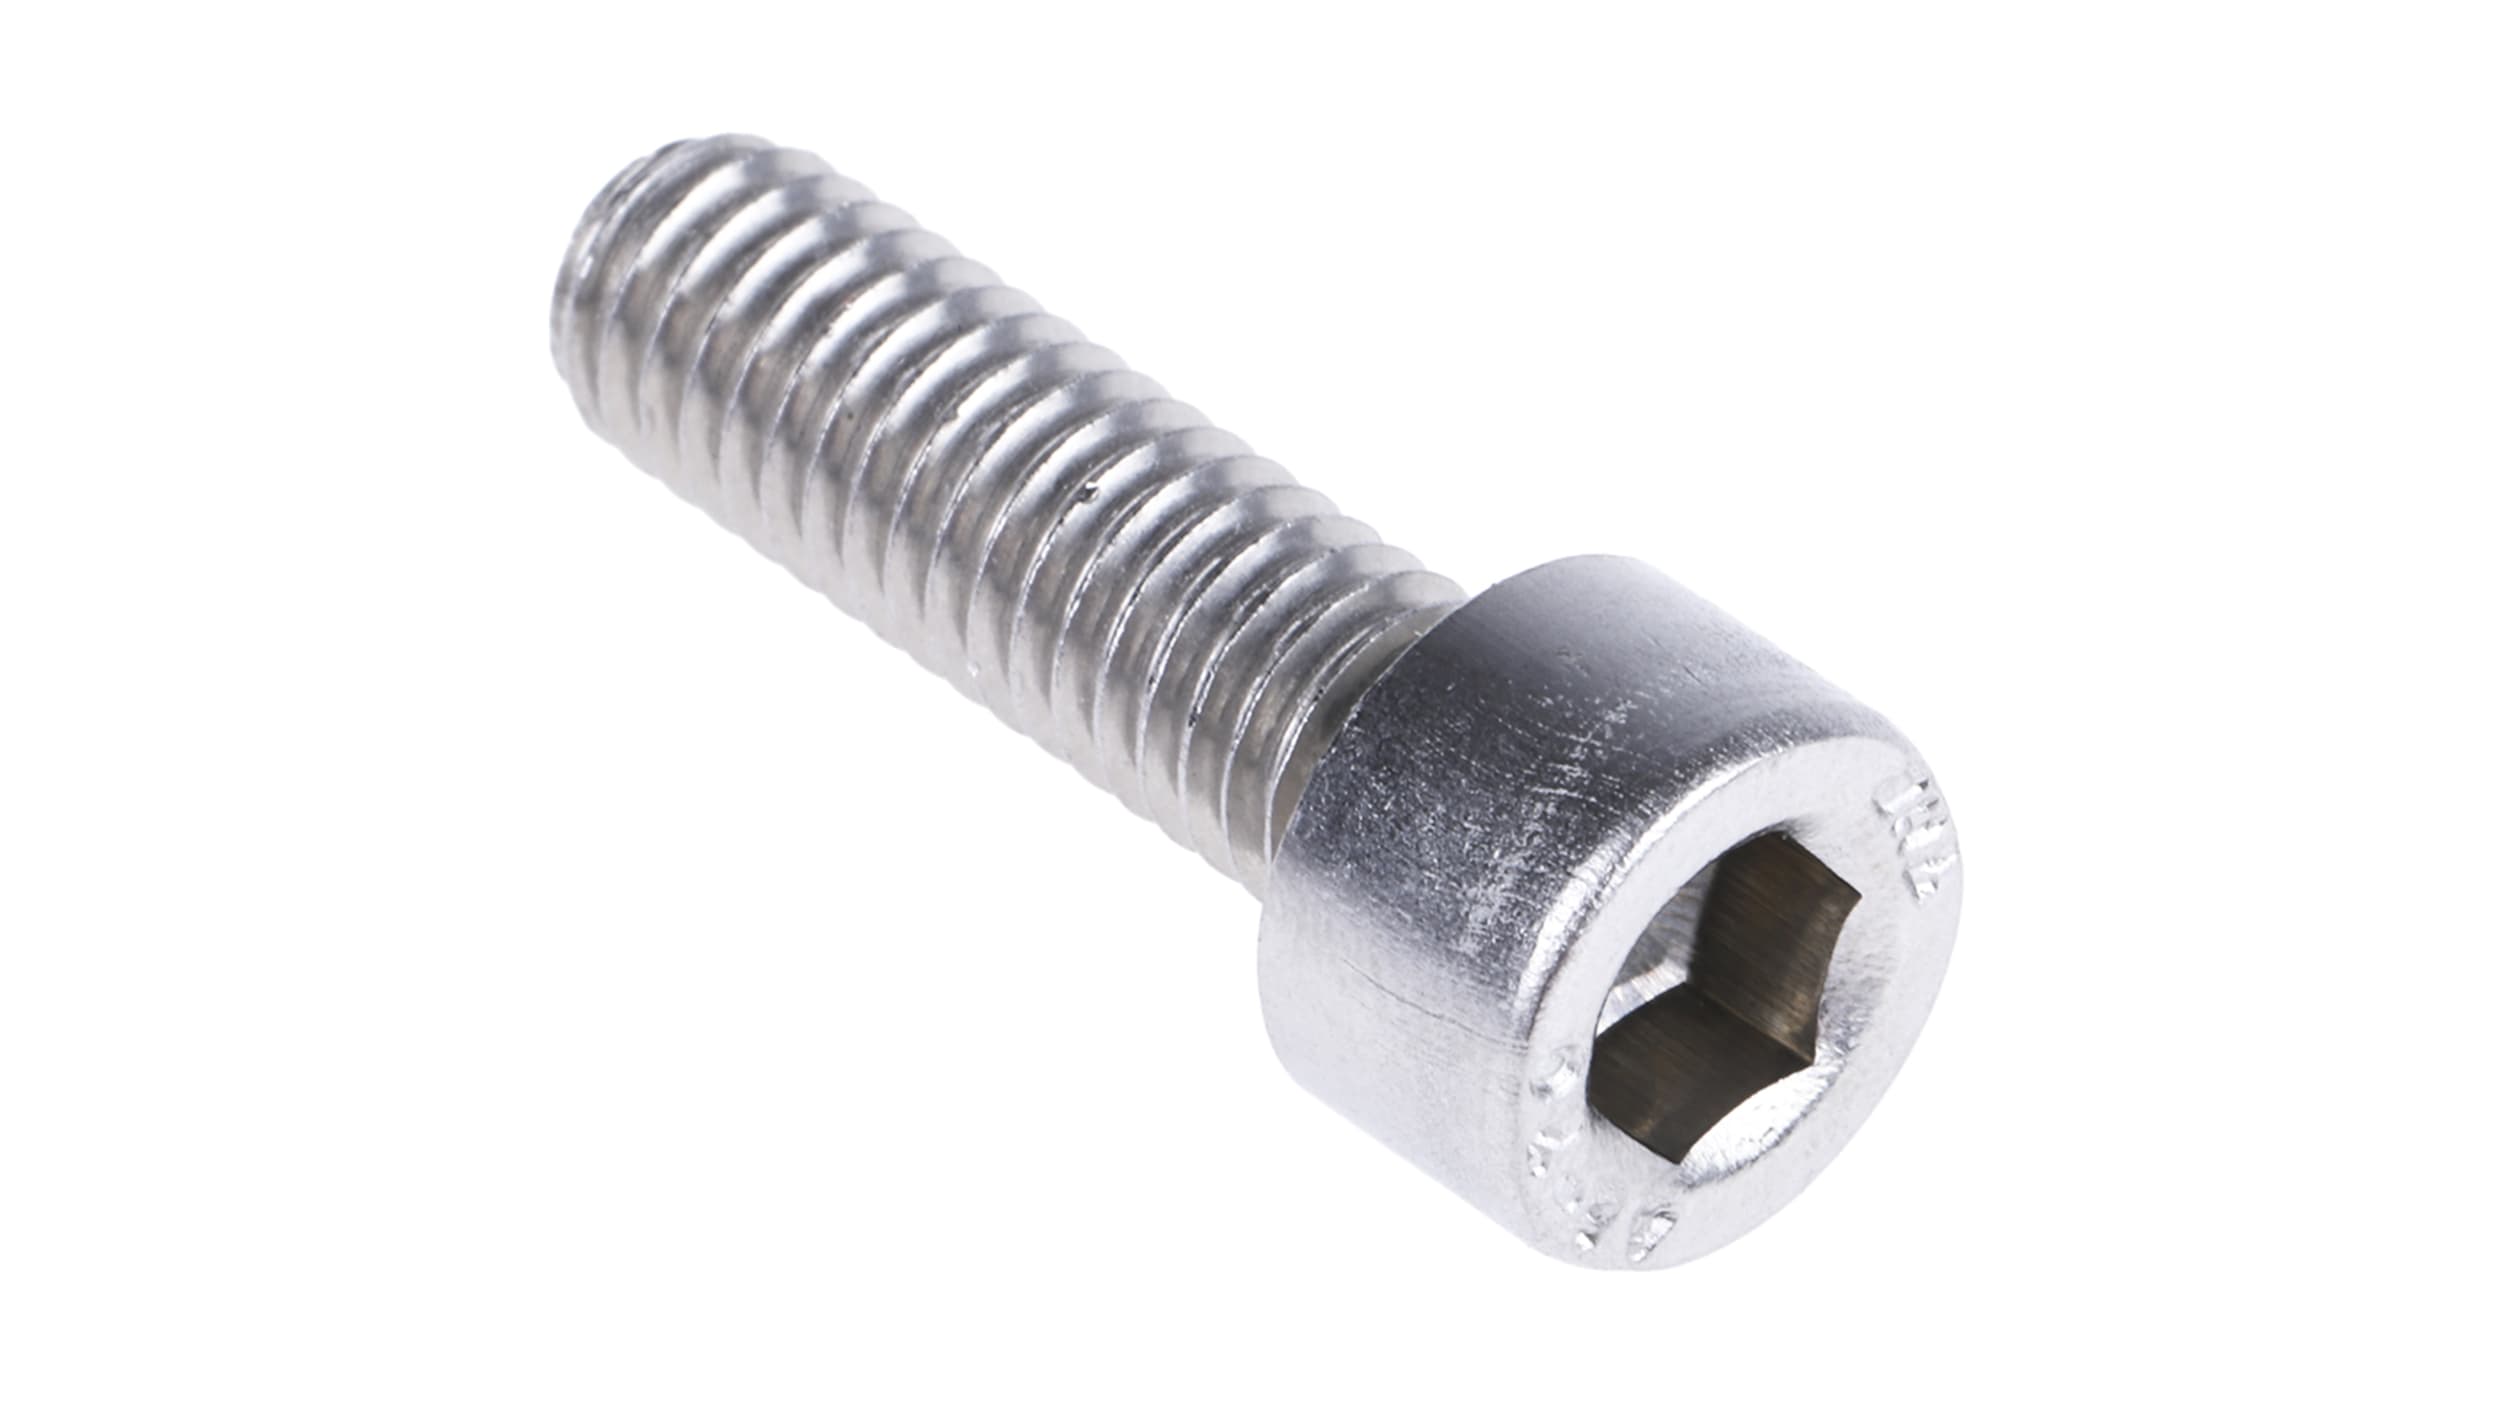 RS PRO M6 x 20mm Hex Socket Cap Screw Stainless Steel